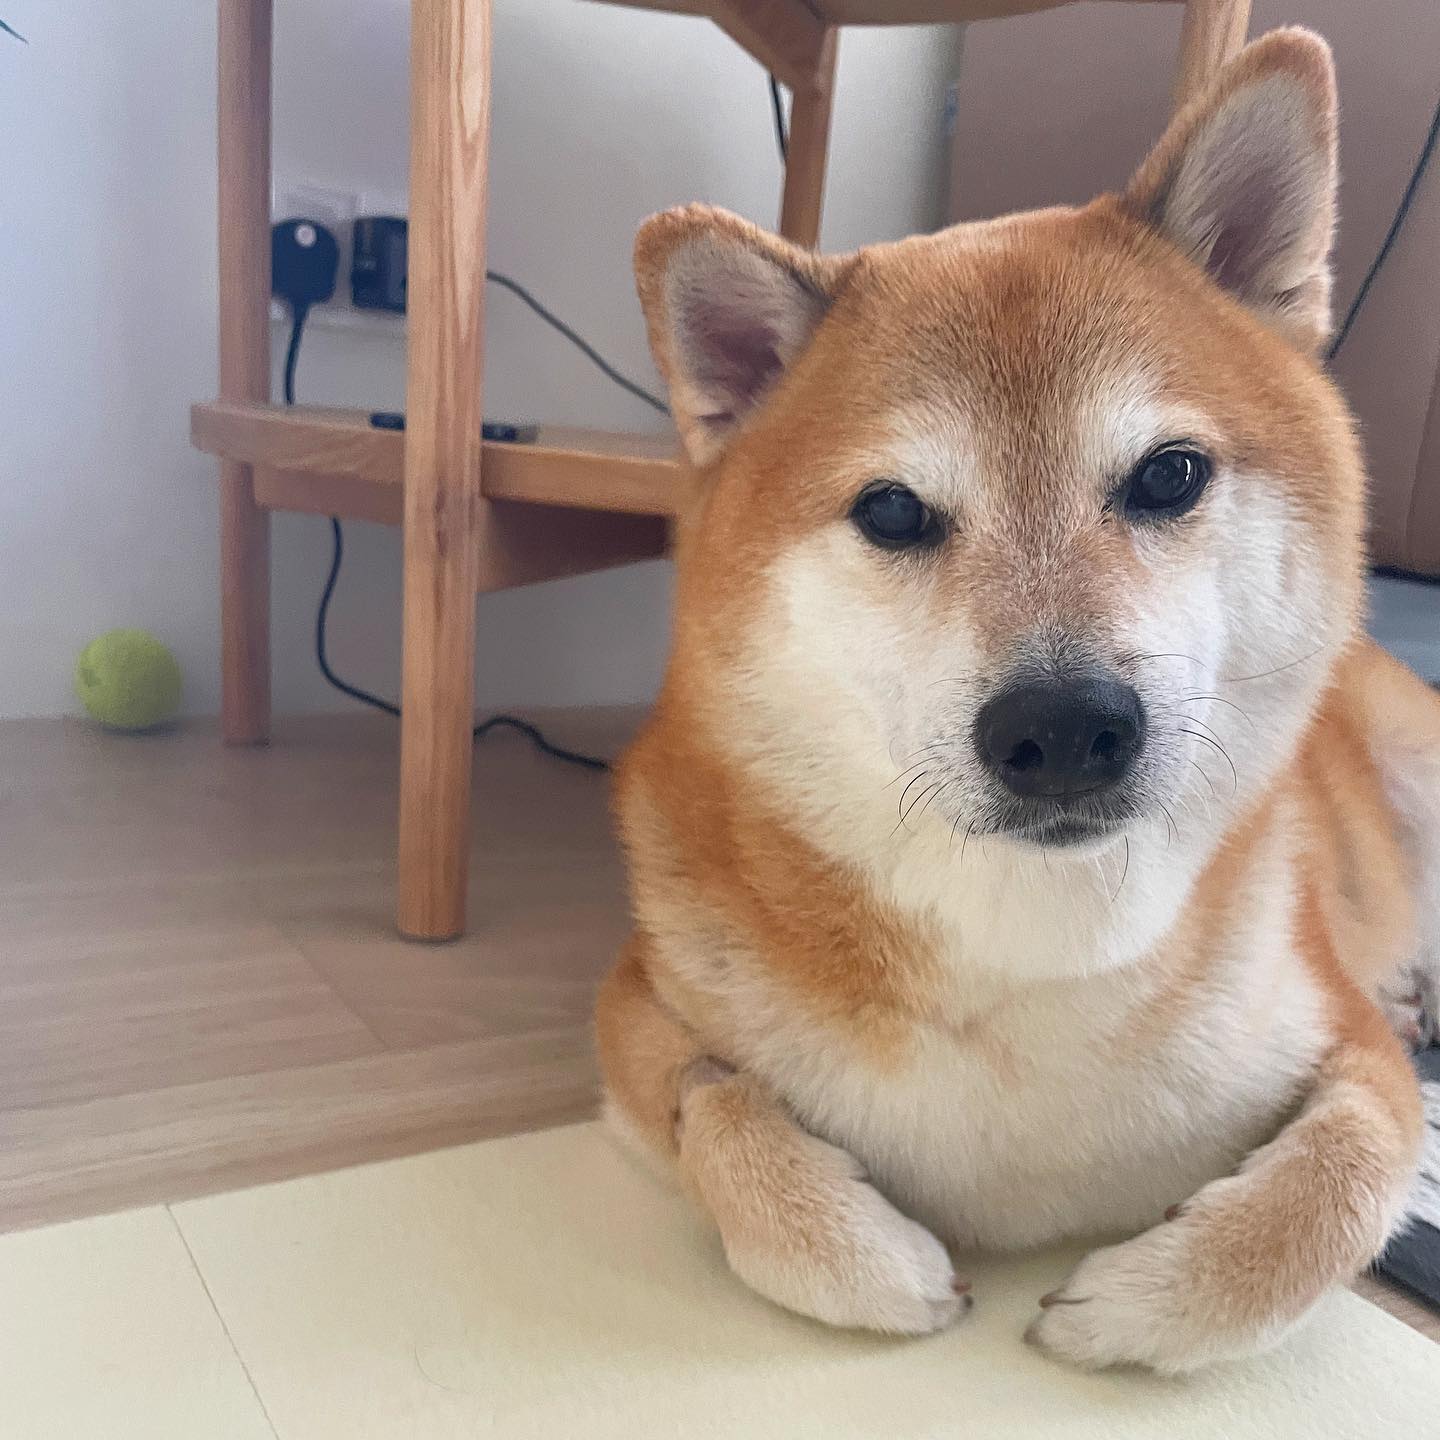 The Shiba Inu behind the famous 'doge' meme is sick with cancer, its owner says | WLRN